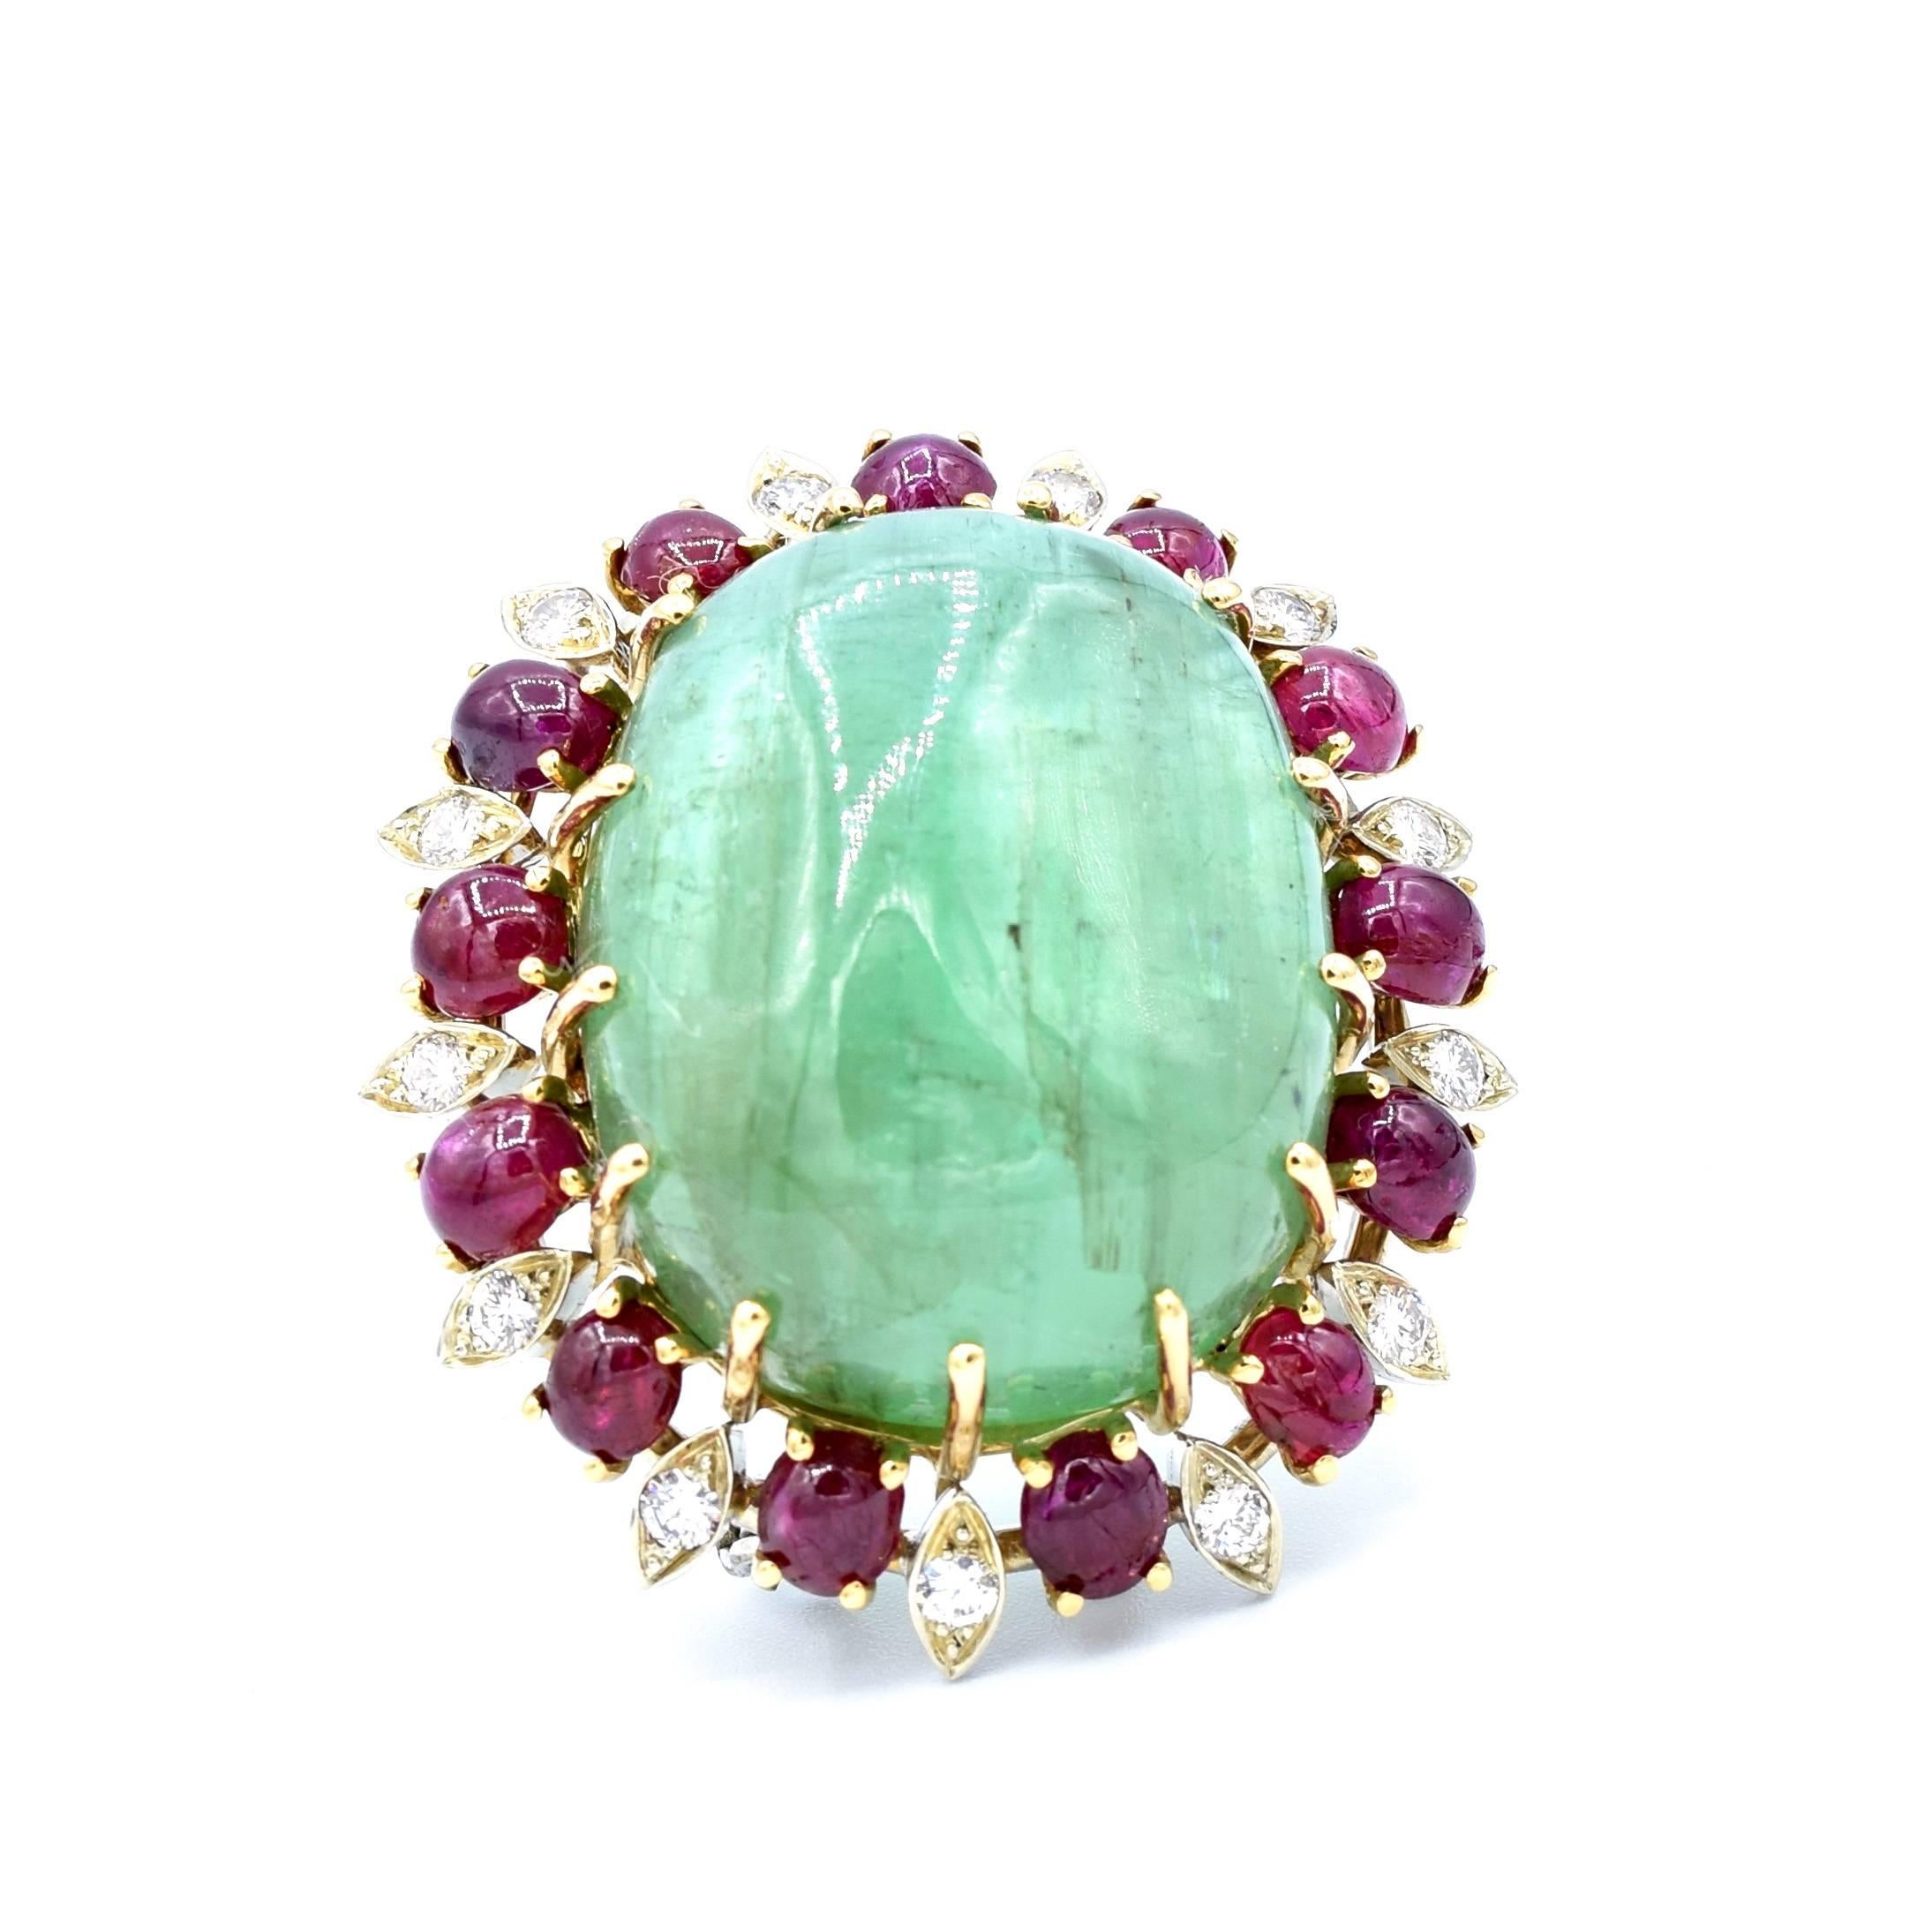 This well-crafted brooch is set with a cabochon-cut emerald (25.31x14.45mm), and is surrounded by 13 cabochon-cut rubies and by 13 round brilliant diamonds of approximately 0.65 total carat weight. 
